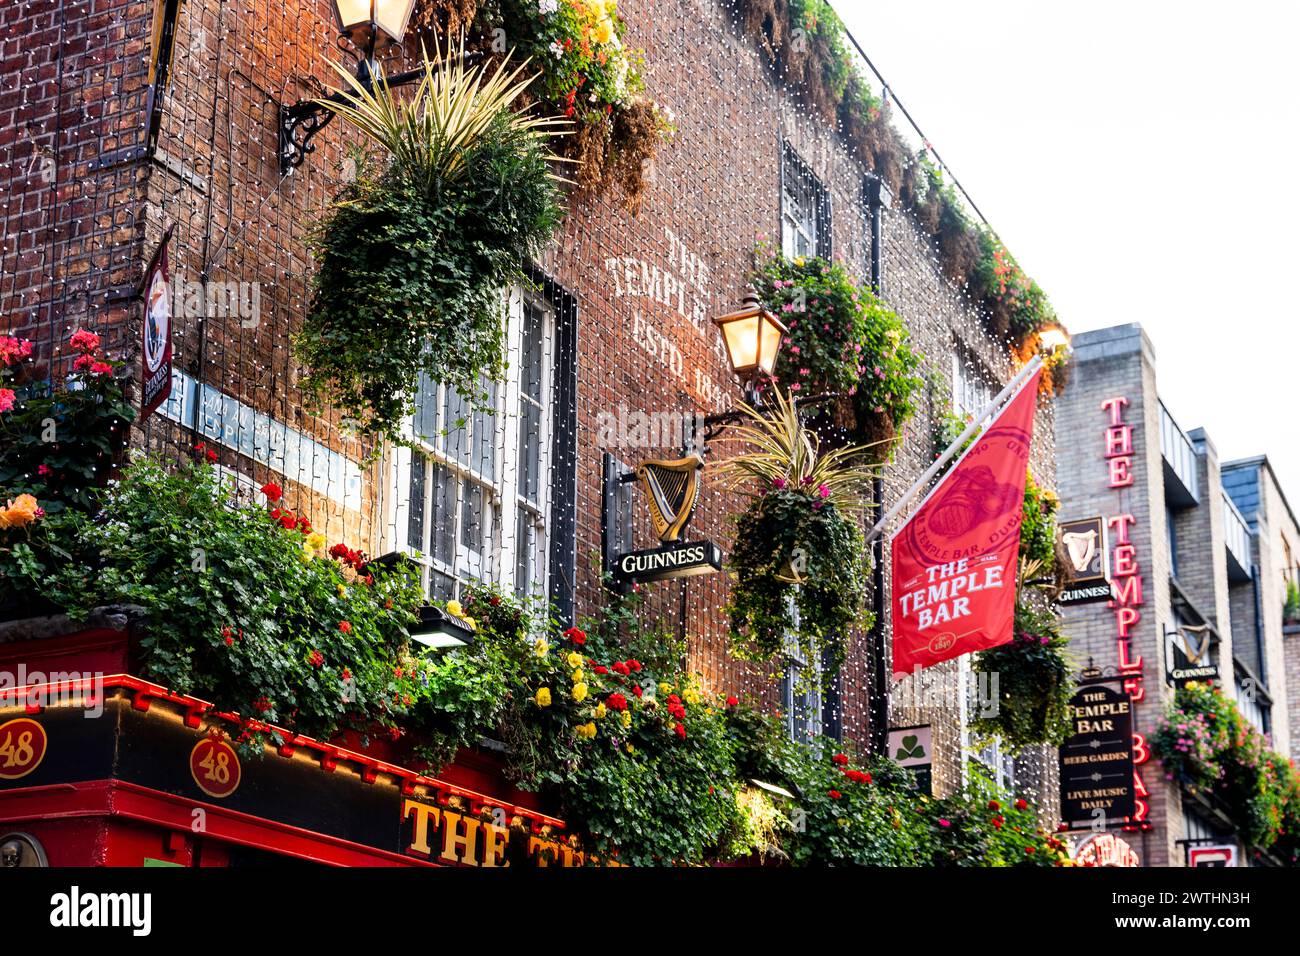 The picturesque wall of well-known Temple Bar Pub on Temple Lane, with flowers and a Guinness vintage sign, Temple Bar district, Dublin Stock Photo